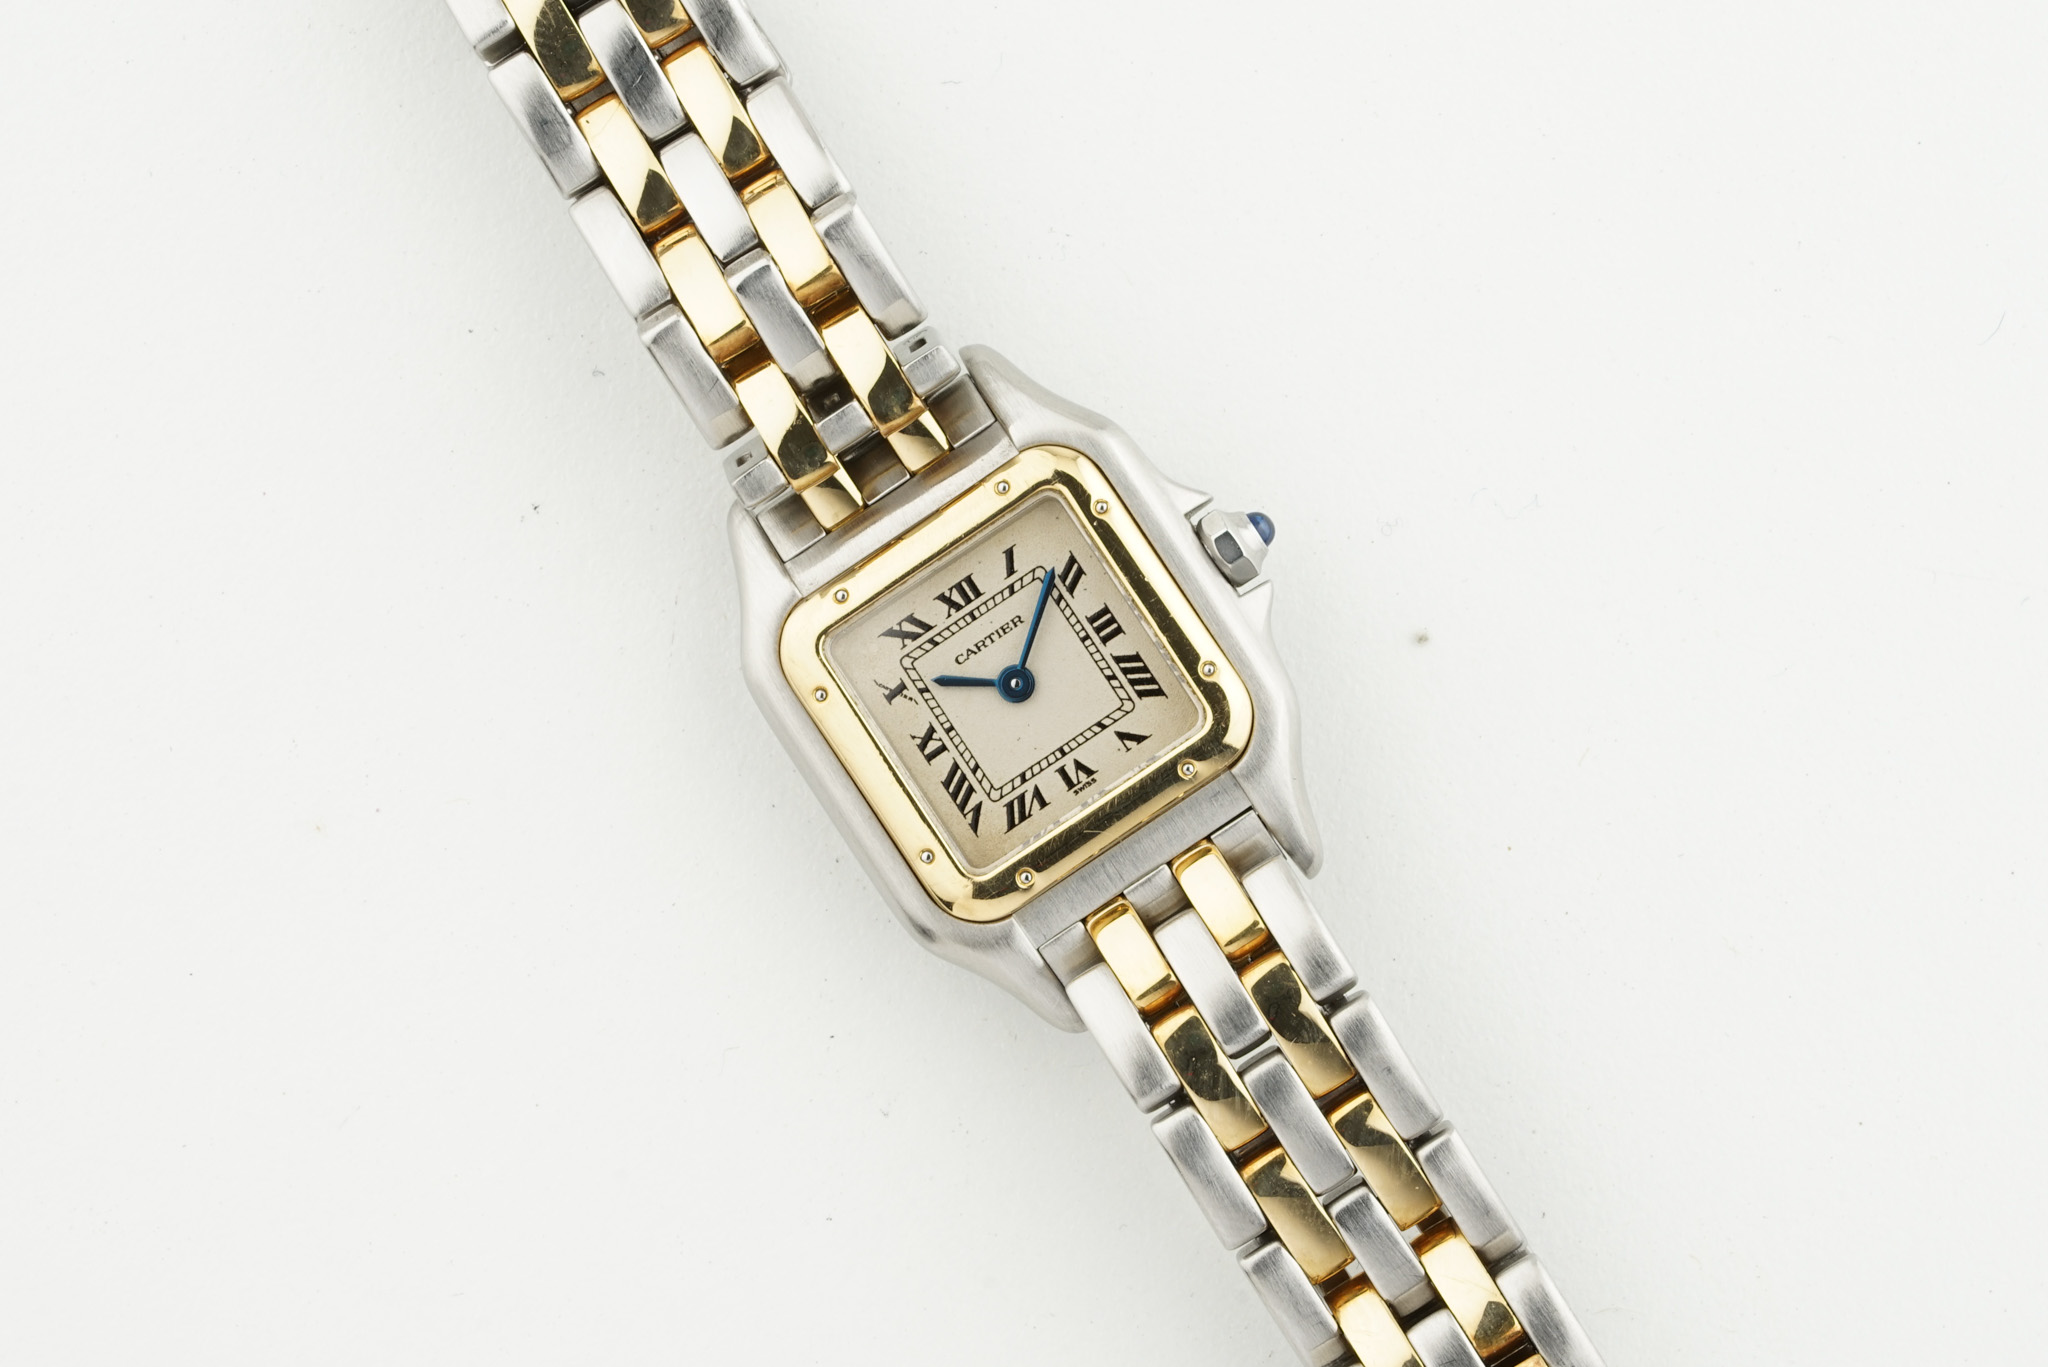 CARTIER PANTHERE STEEL & GOLD DATE WRISTWATCH REF. 1120, square off white dial with roman numeral